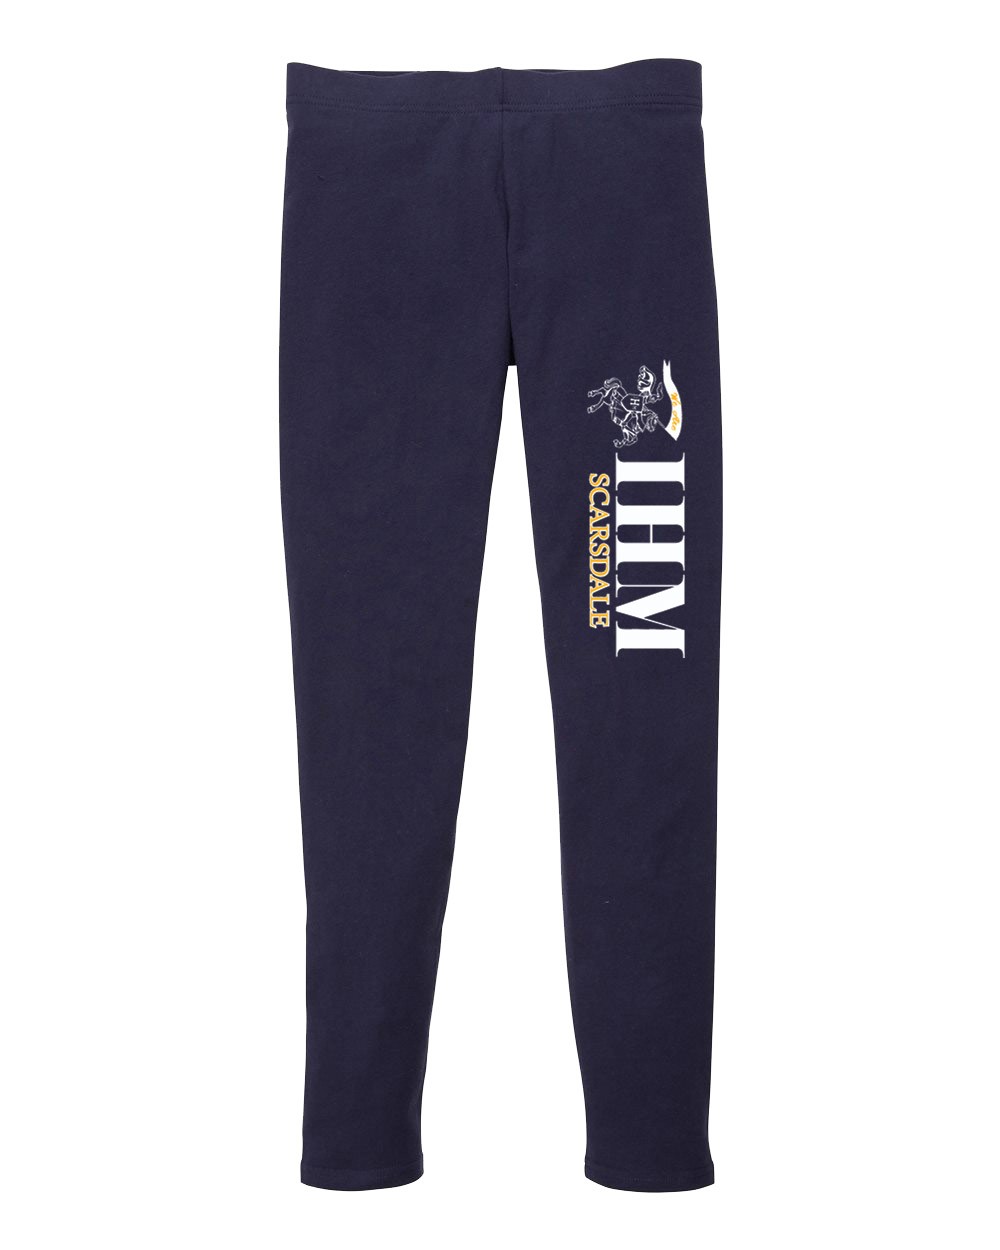 IHM Spirit Leggings w/ White Knight Logo - Please Allow 2-3 Weeks for Delivery